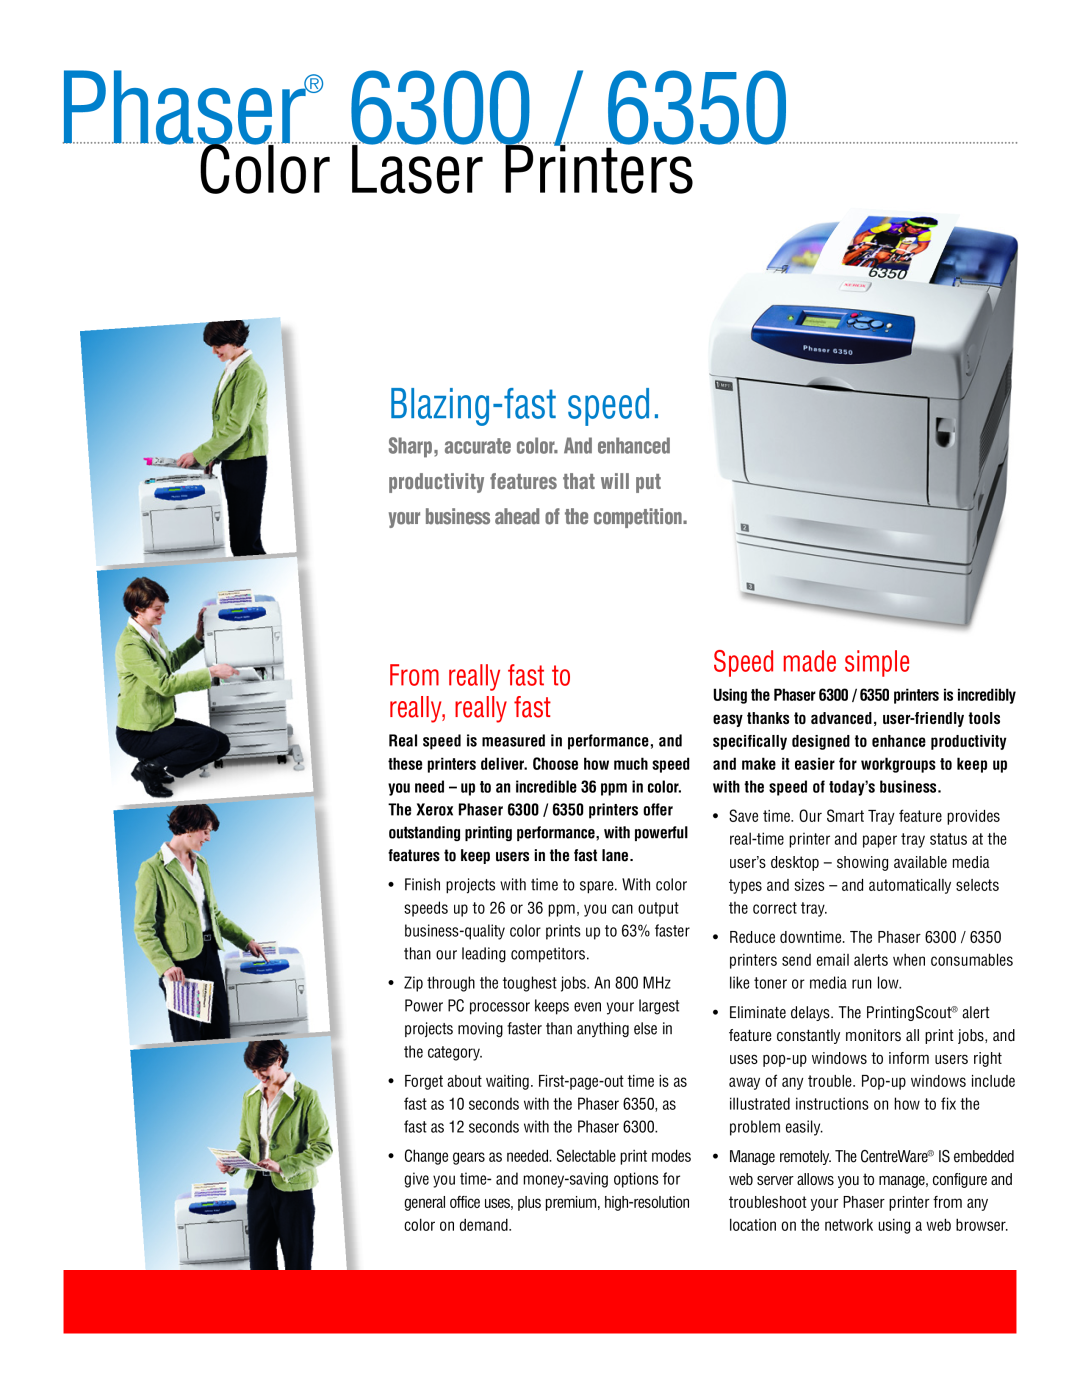 Xerox 6350 Speed made simple, Phaser, Color Laser Printers, Blazing-fast speed, From really fast to really, really fast 